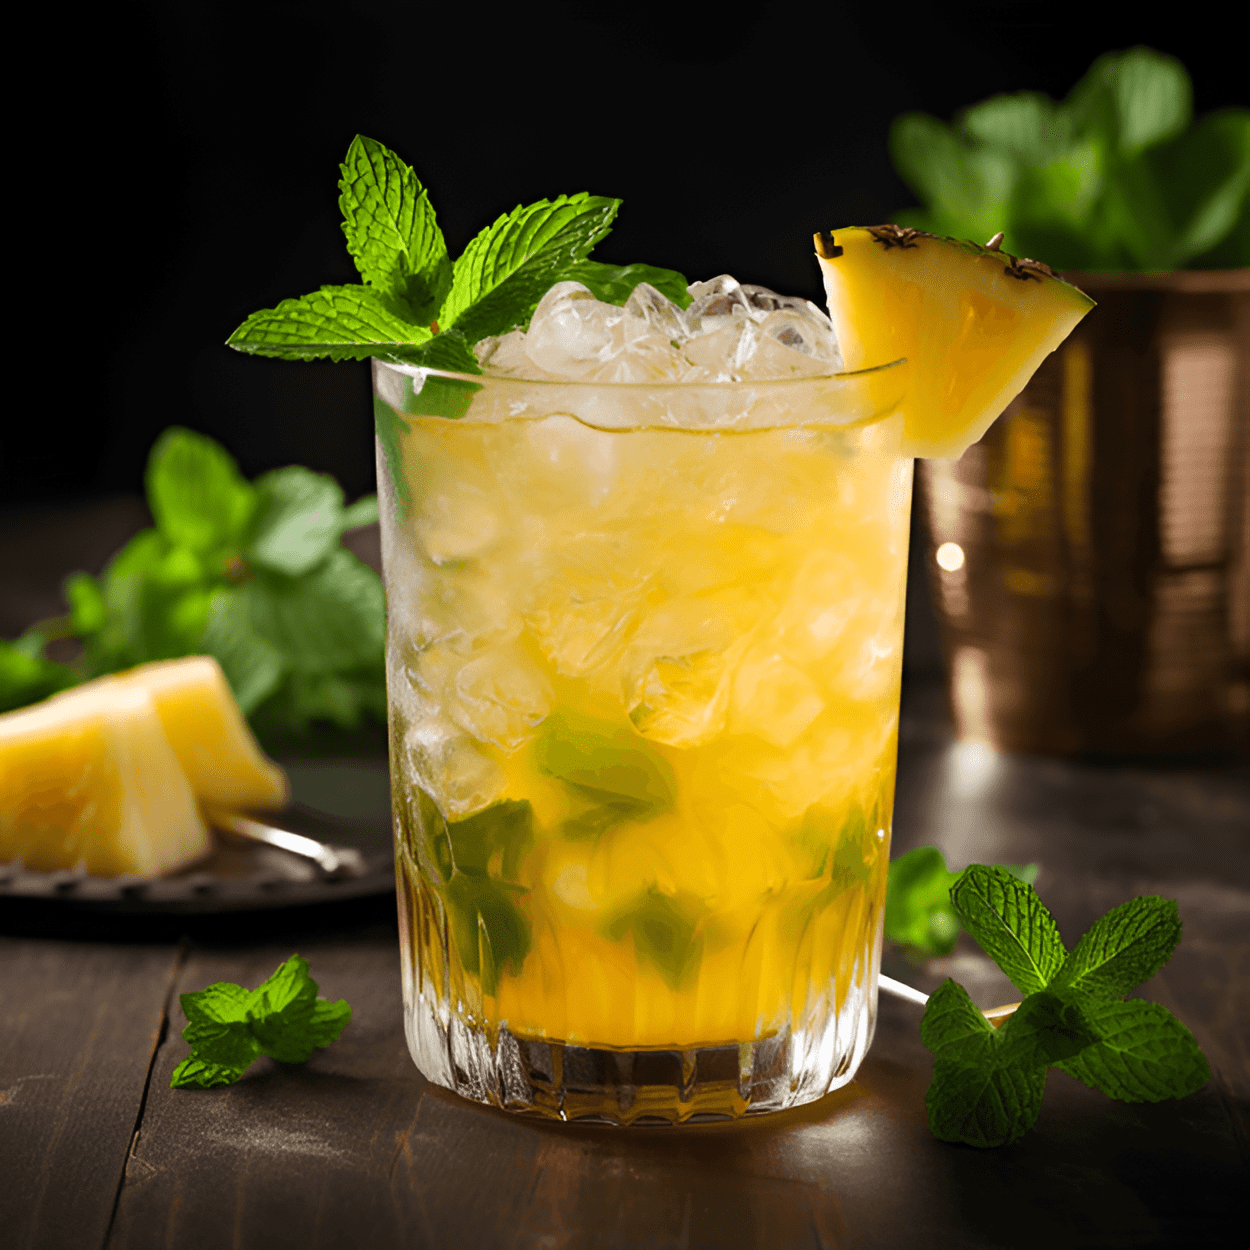 Uptown Cocktail Recipe - The Uptown cocktail is a delightful blend of sweet, sour, and fruity flavors. The sweetness of the pineapple juice is perfectly balanced by the tartness of the lime juice, while the vodka adds a smooth and clean finish. The addition of mint leaves gives the cocktail a refreshing and aromatic twist.